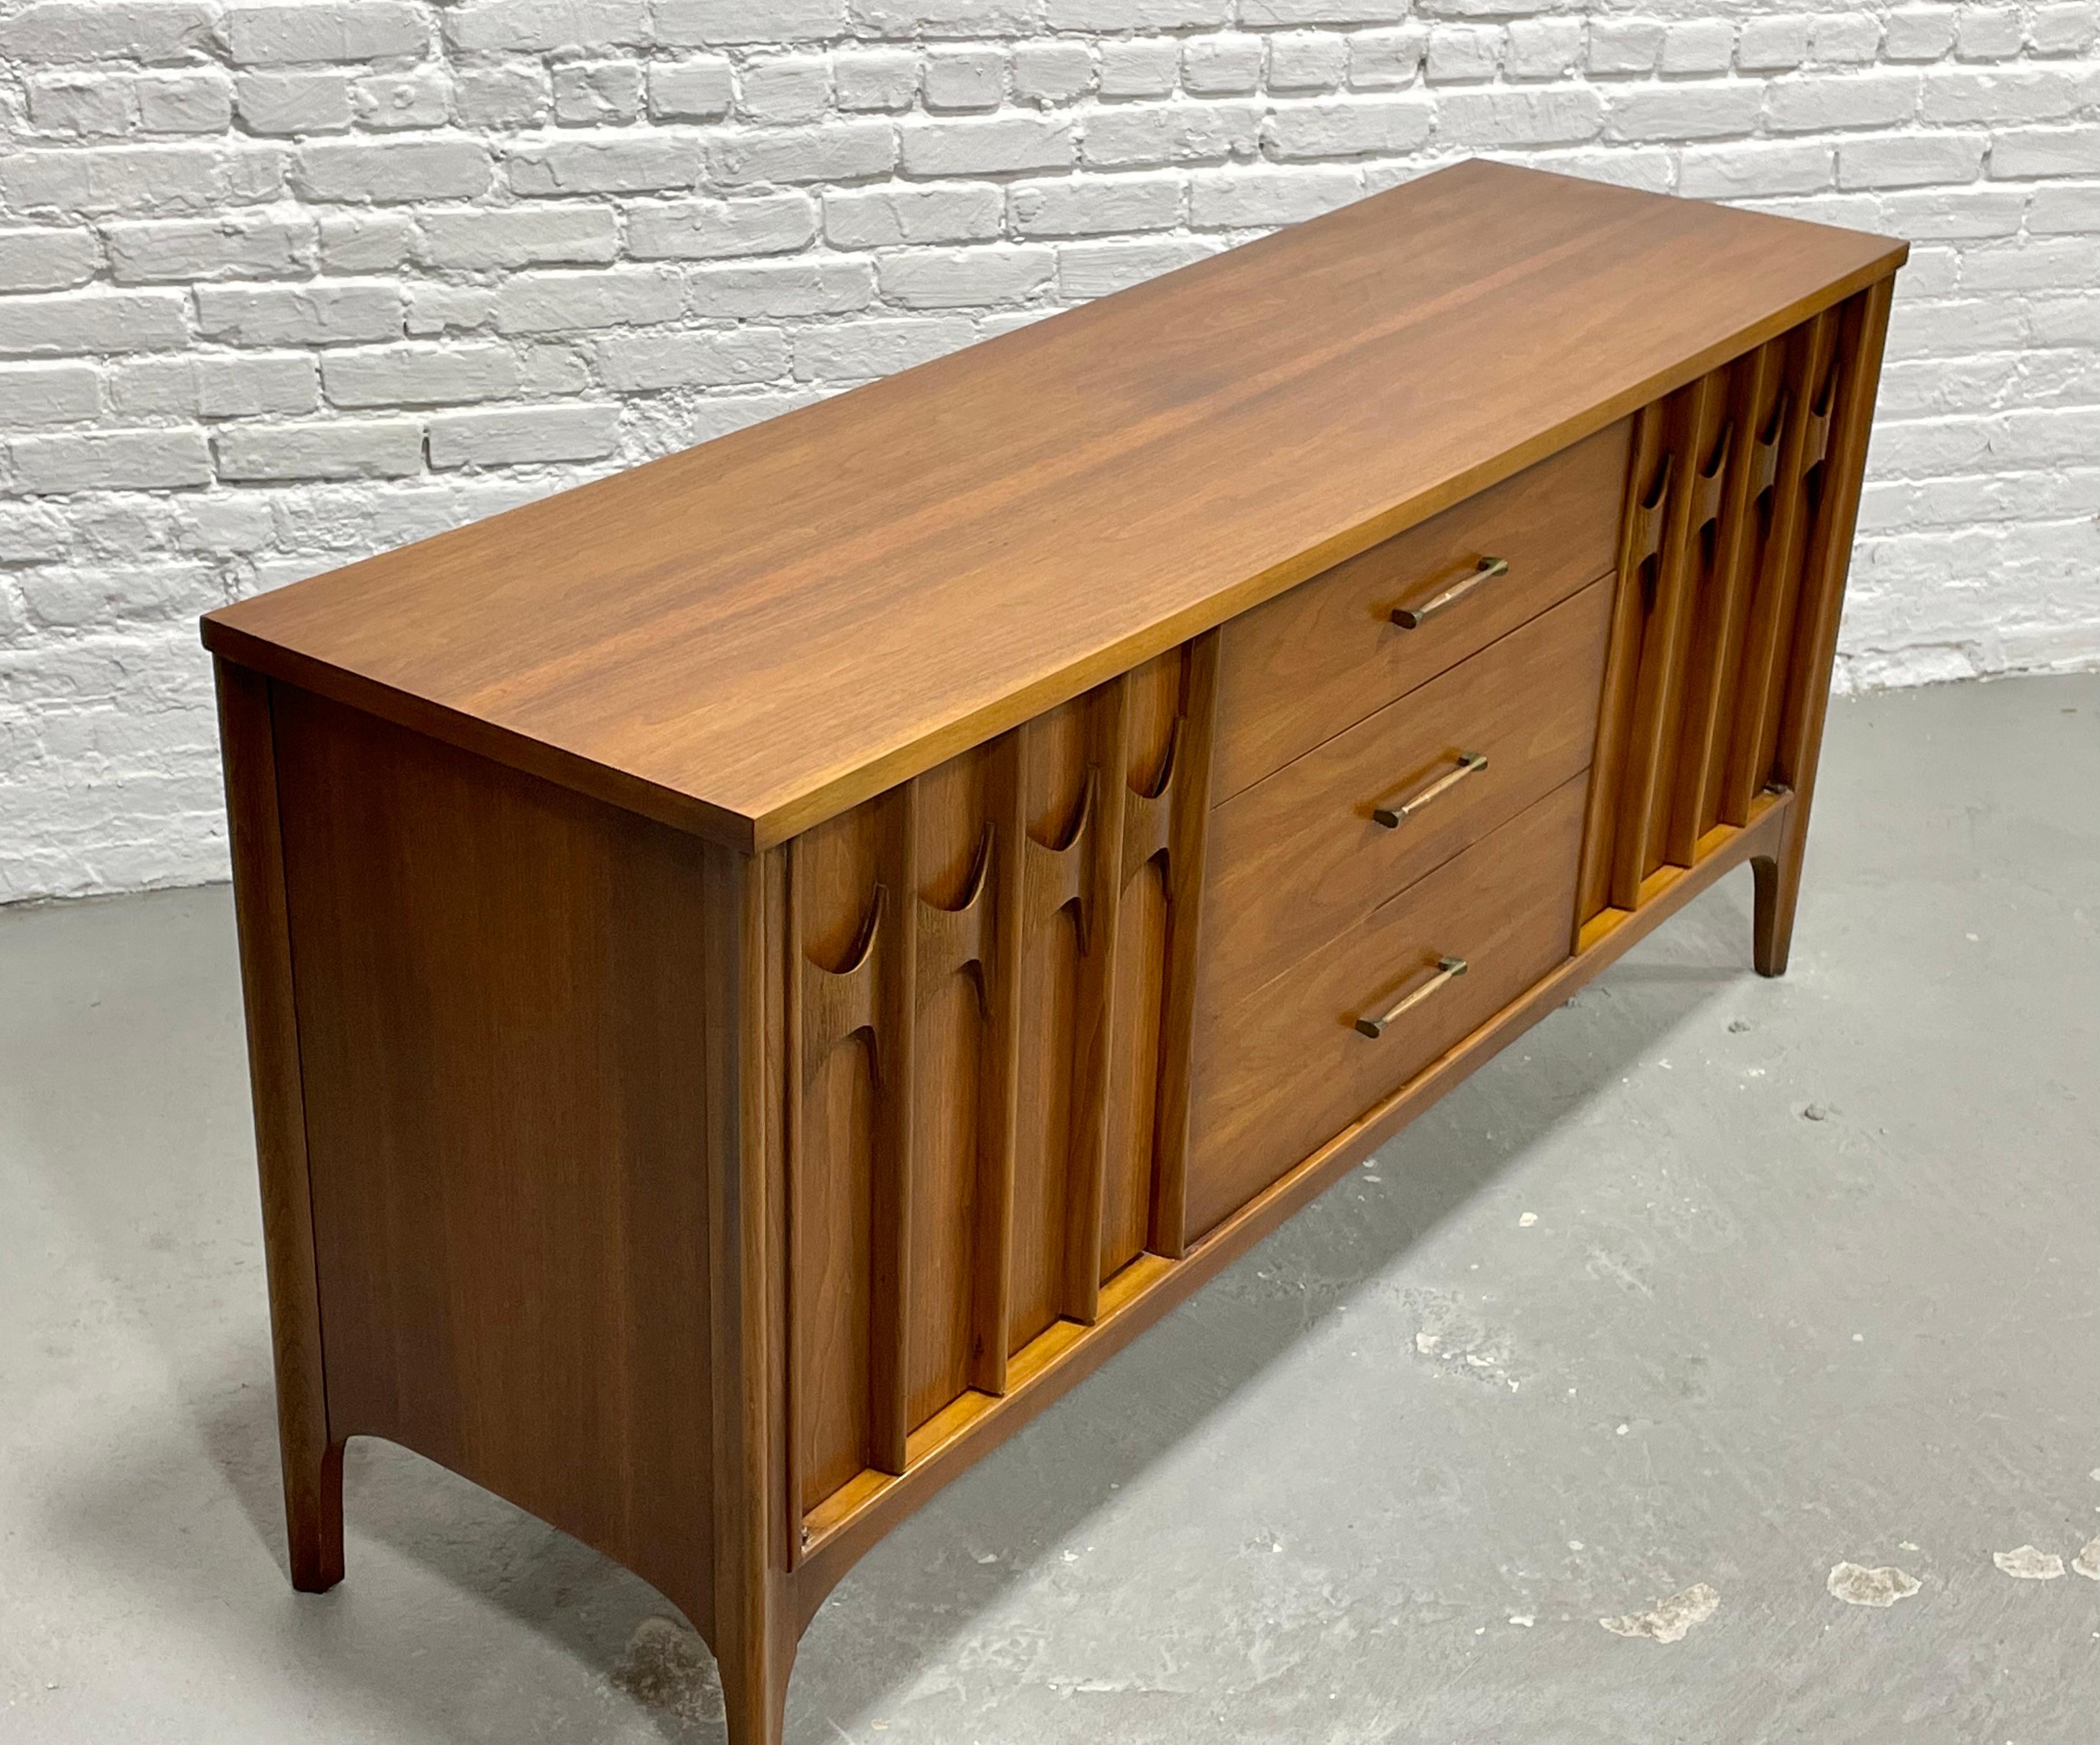 SCULPTED Mid Century MODERN CREDENZA / Long Dresser by Kent Coffey Perspecta, c. 4